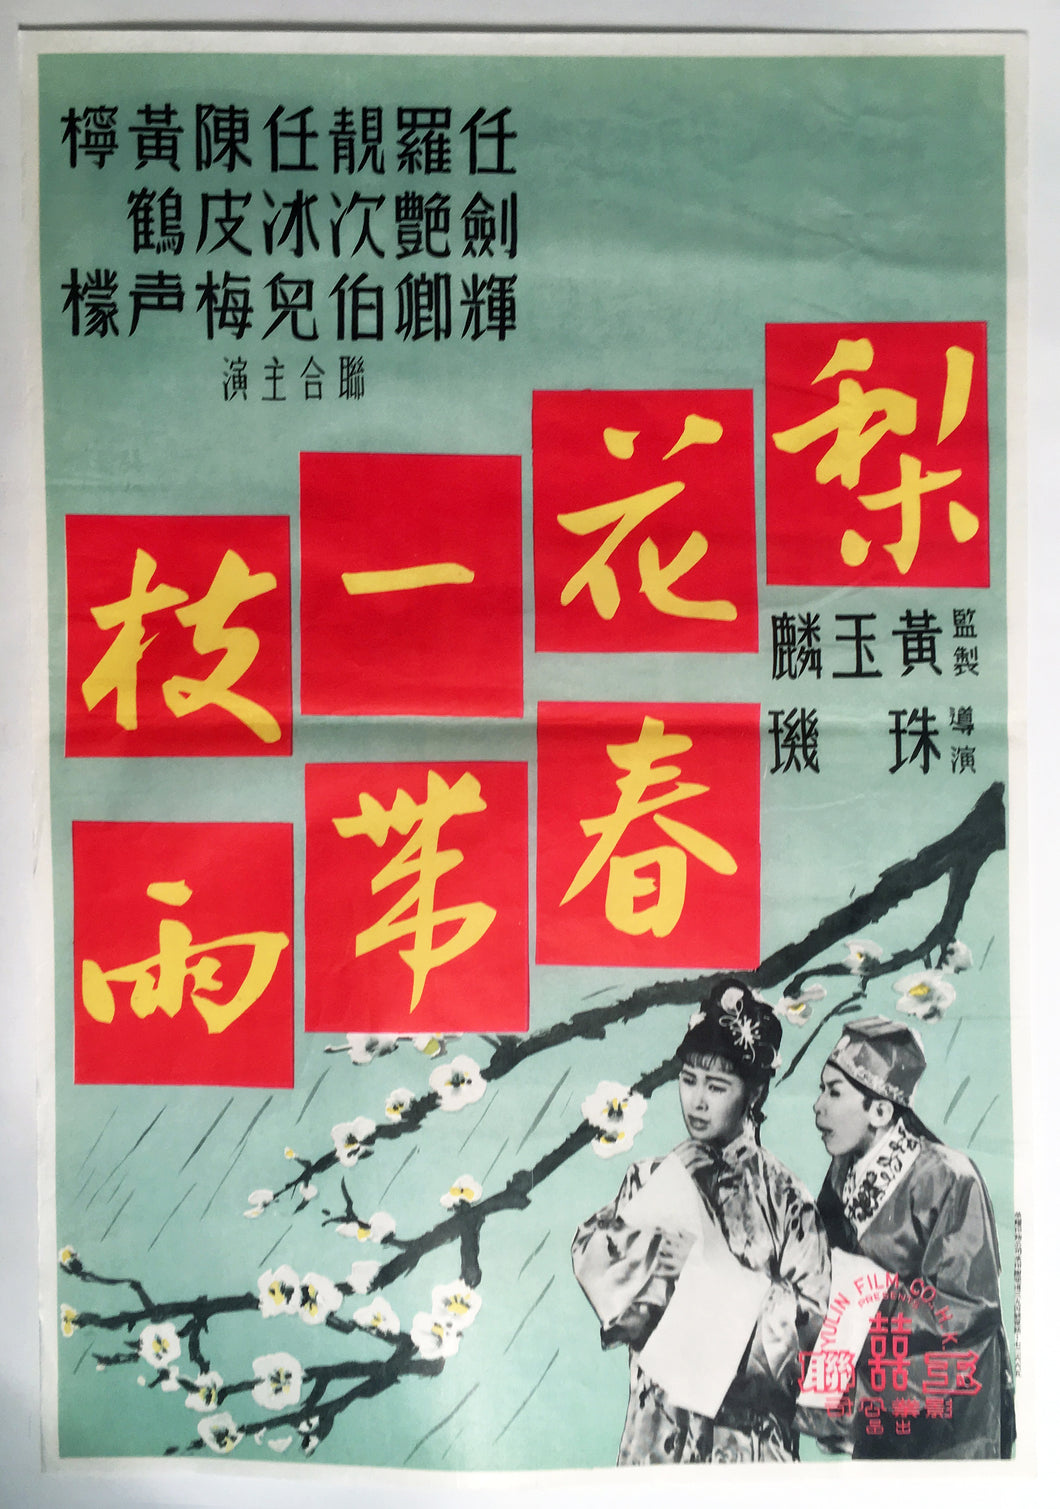 1950s Vintage Chinese Movie Poster, Blossoms - TheBoxSF